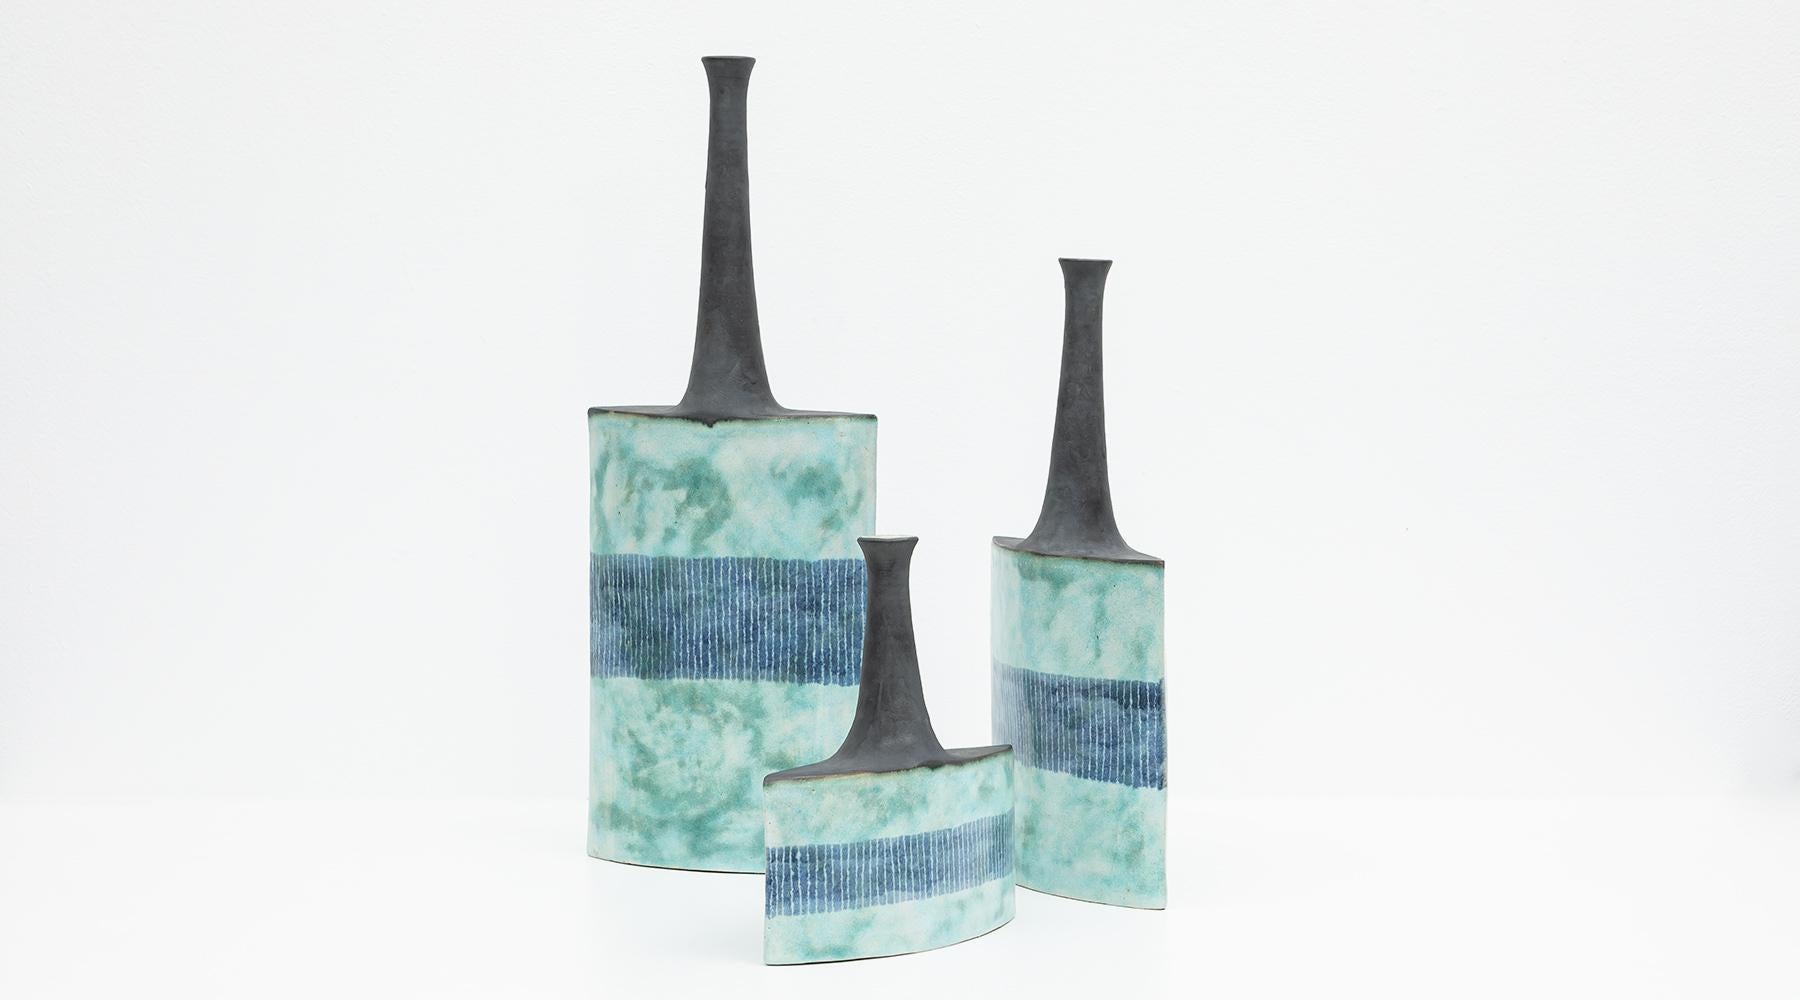 Set of three vases, ceramic, Bruno Gambone, Italy, 1980s.

Lovely set of three vases by the multi-talented artist Bruno Gambone from 1980s, varying in height but always the same width. Each vase comes with a long matte black neck, the body in